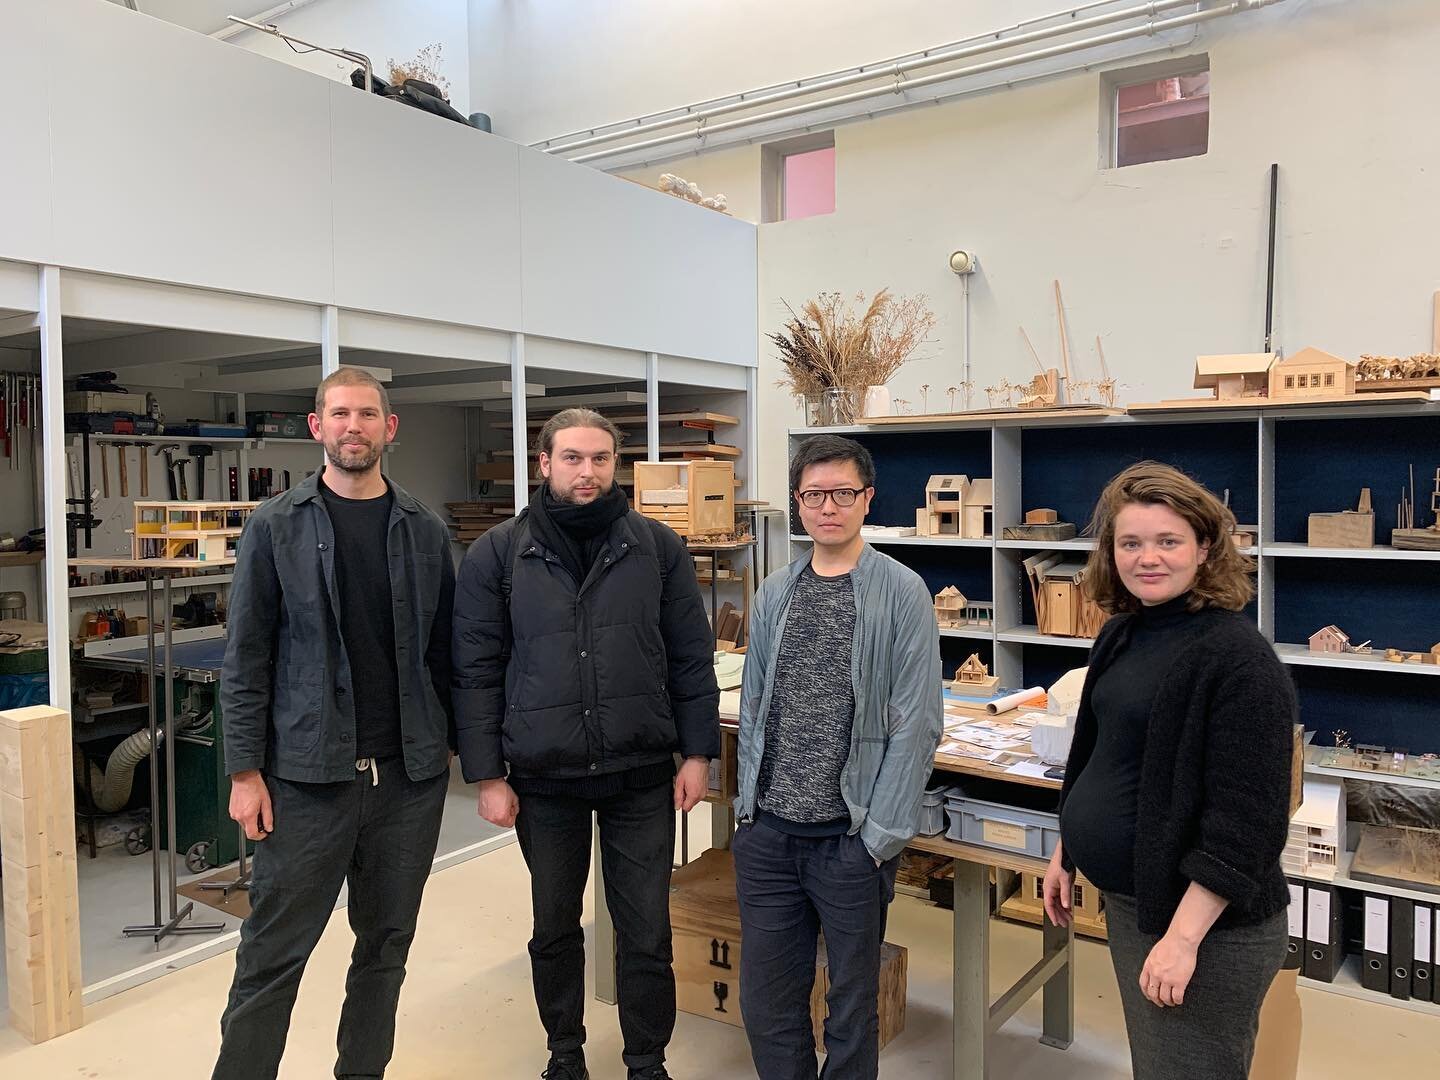 Last week @chan.carson from MoMa New York visited @werkstatt_nu He is the director of the Emilio Ambasz Institute for the Joint Study of the Built and the Natural Environment, and curator in the Department of Architecture and Design. We had a very in